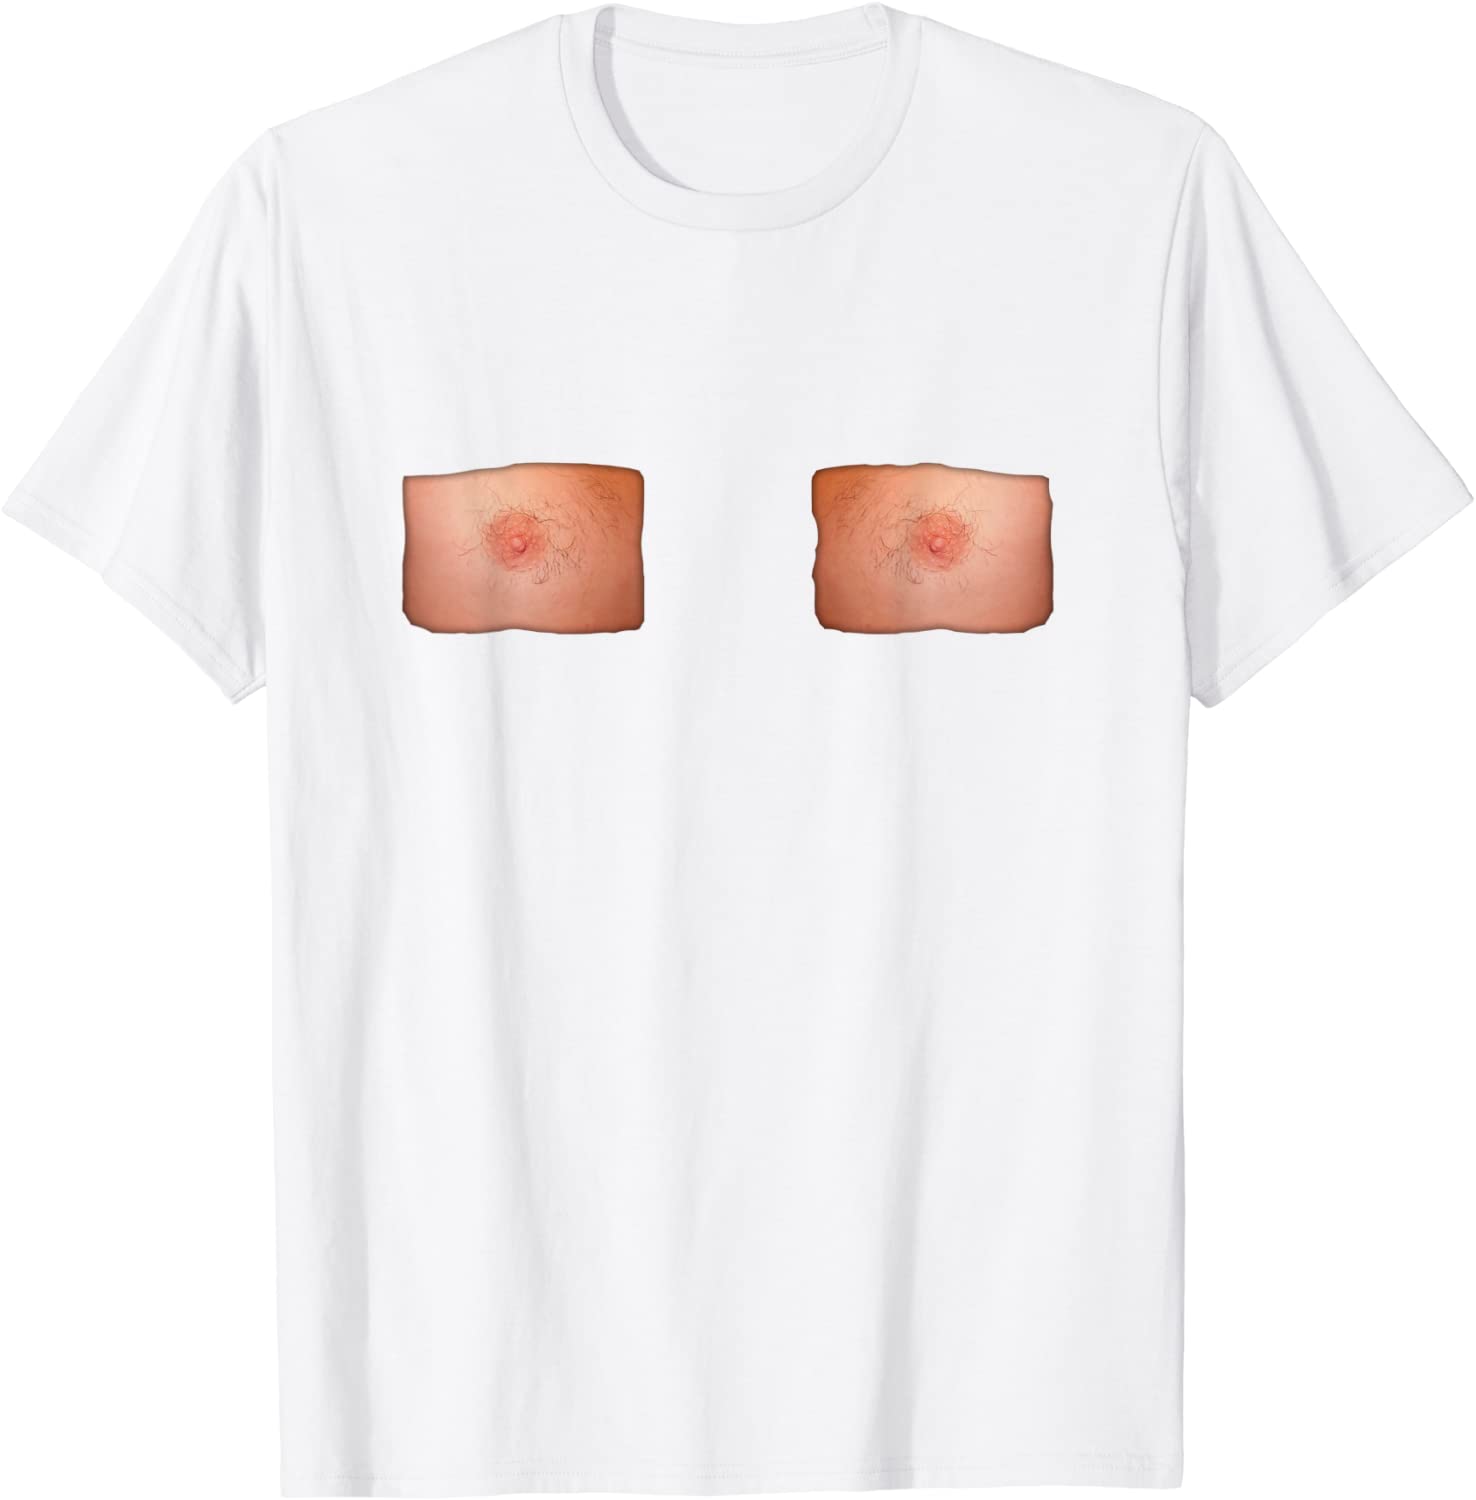 byron hutchinson recommends Nipple Hole Shirt